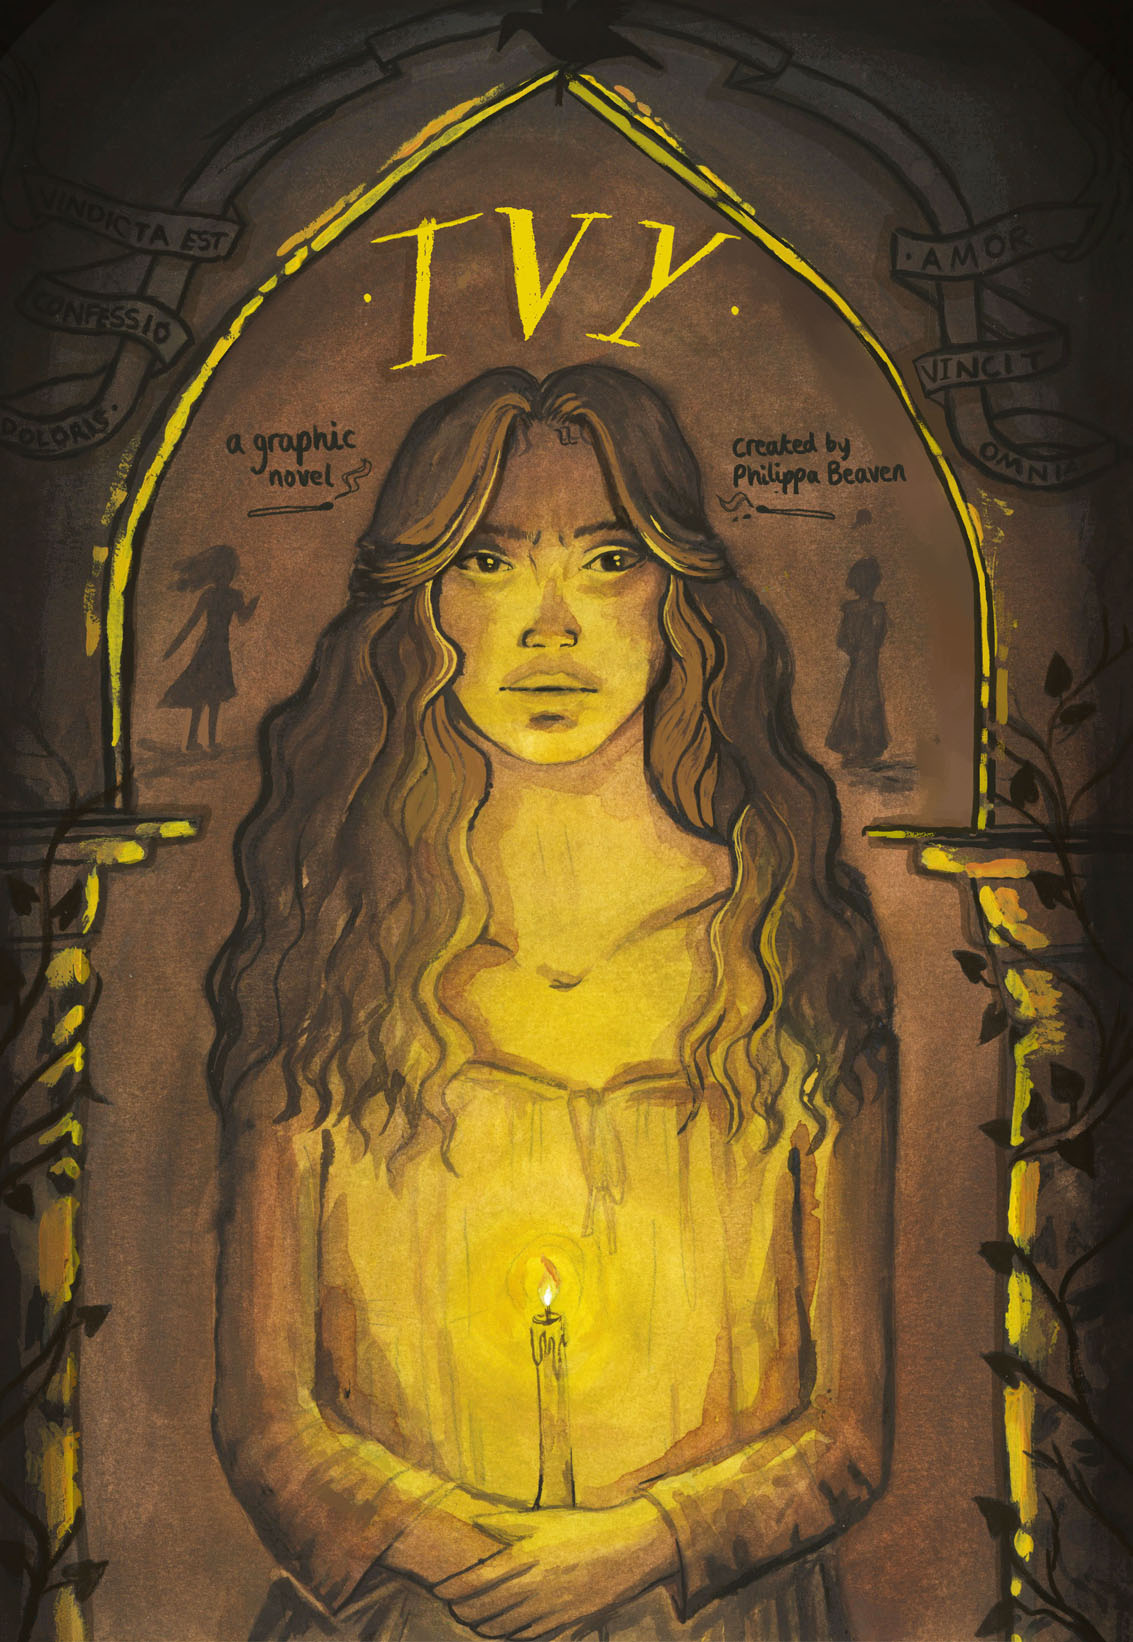 The front cover of Philippa Beaven's graphic novel, 'Ivy'. The main character stands in the centre, illuminated by yellow light emitted by a candle she is holding.